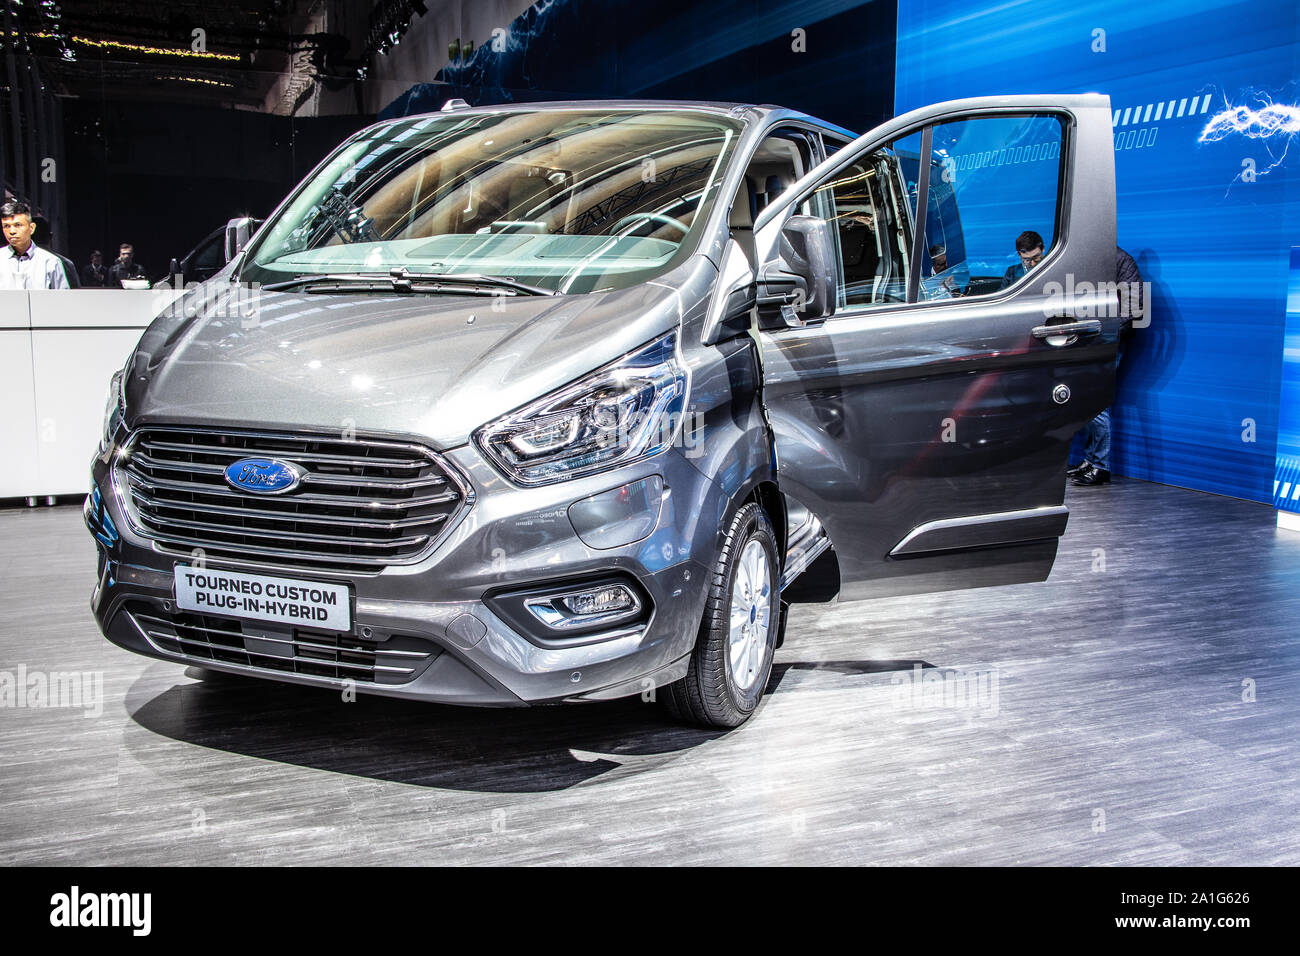 Frankfurt, Germany, Sep 2019: Ford Tourneo Custom Plug-In-Hybrid at IAA,  PIH mid-sized, front wheel drive passenger version van produced by Ford  Stock Photo - Alamy